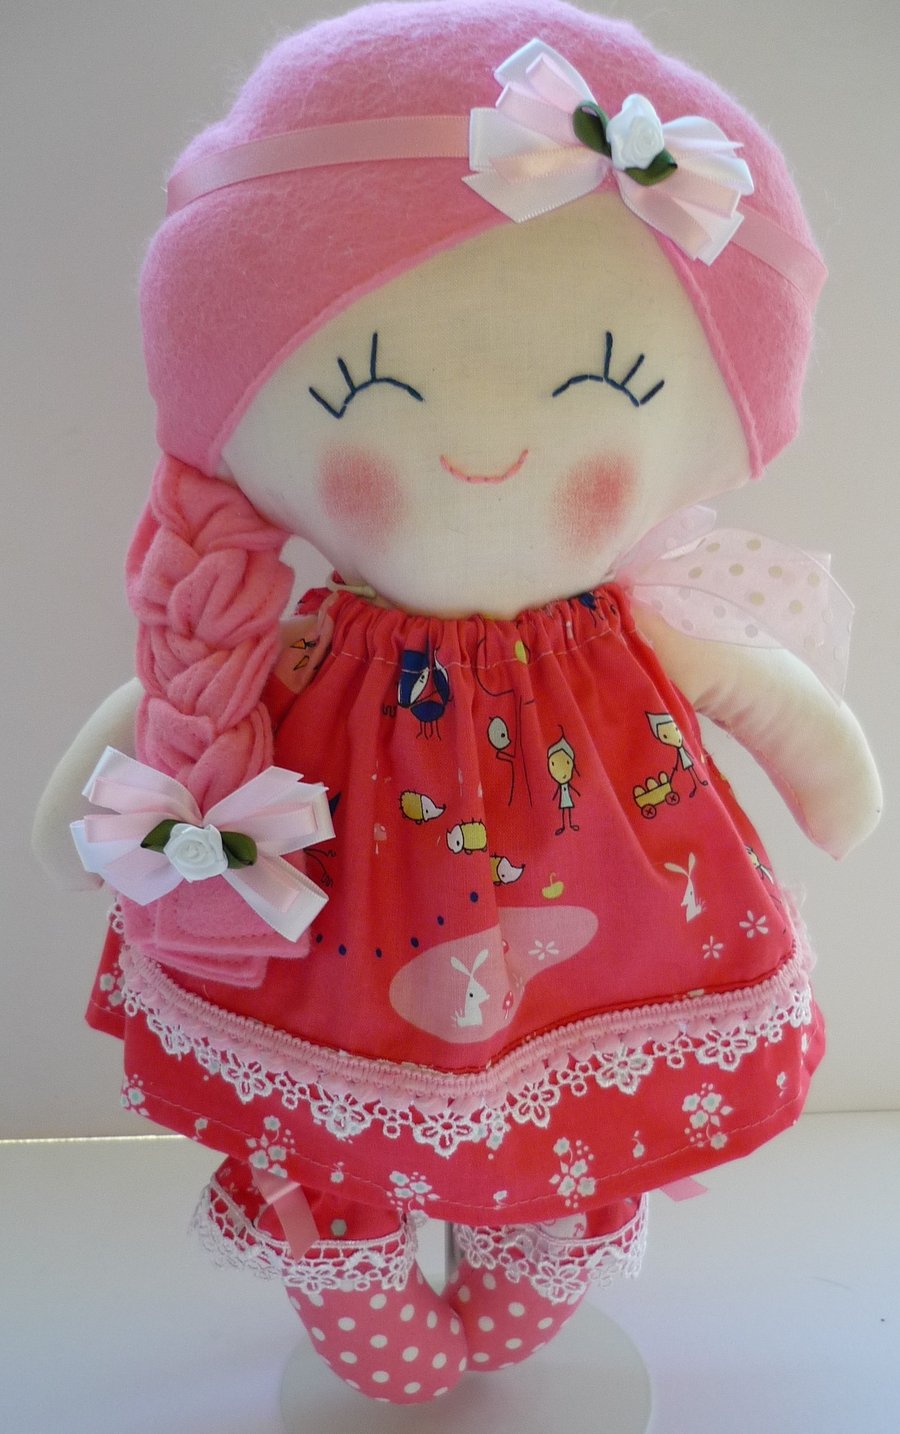 Handmade Rag Doll in Dress and Bloomers